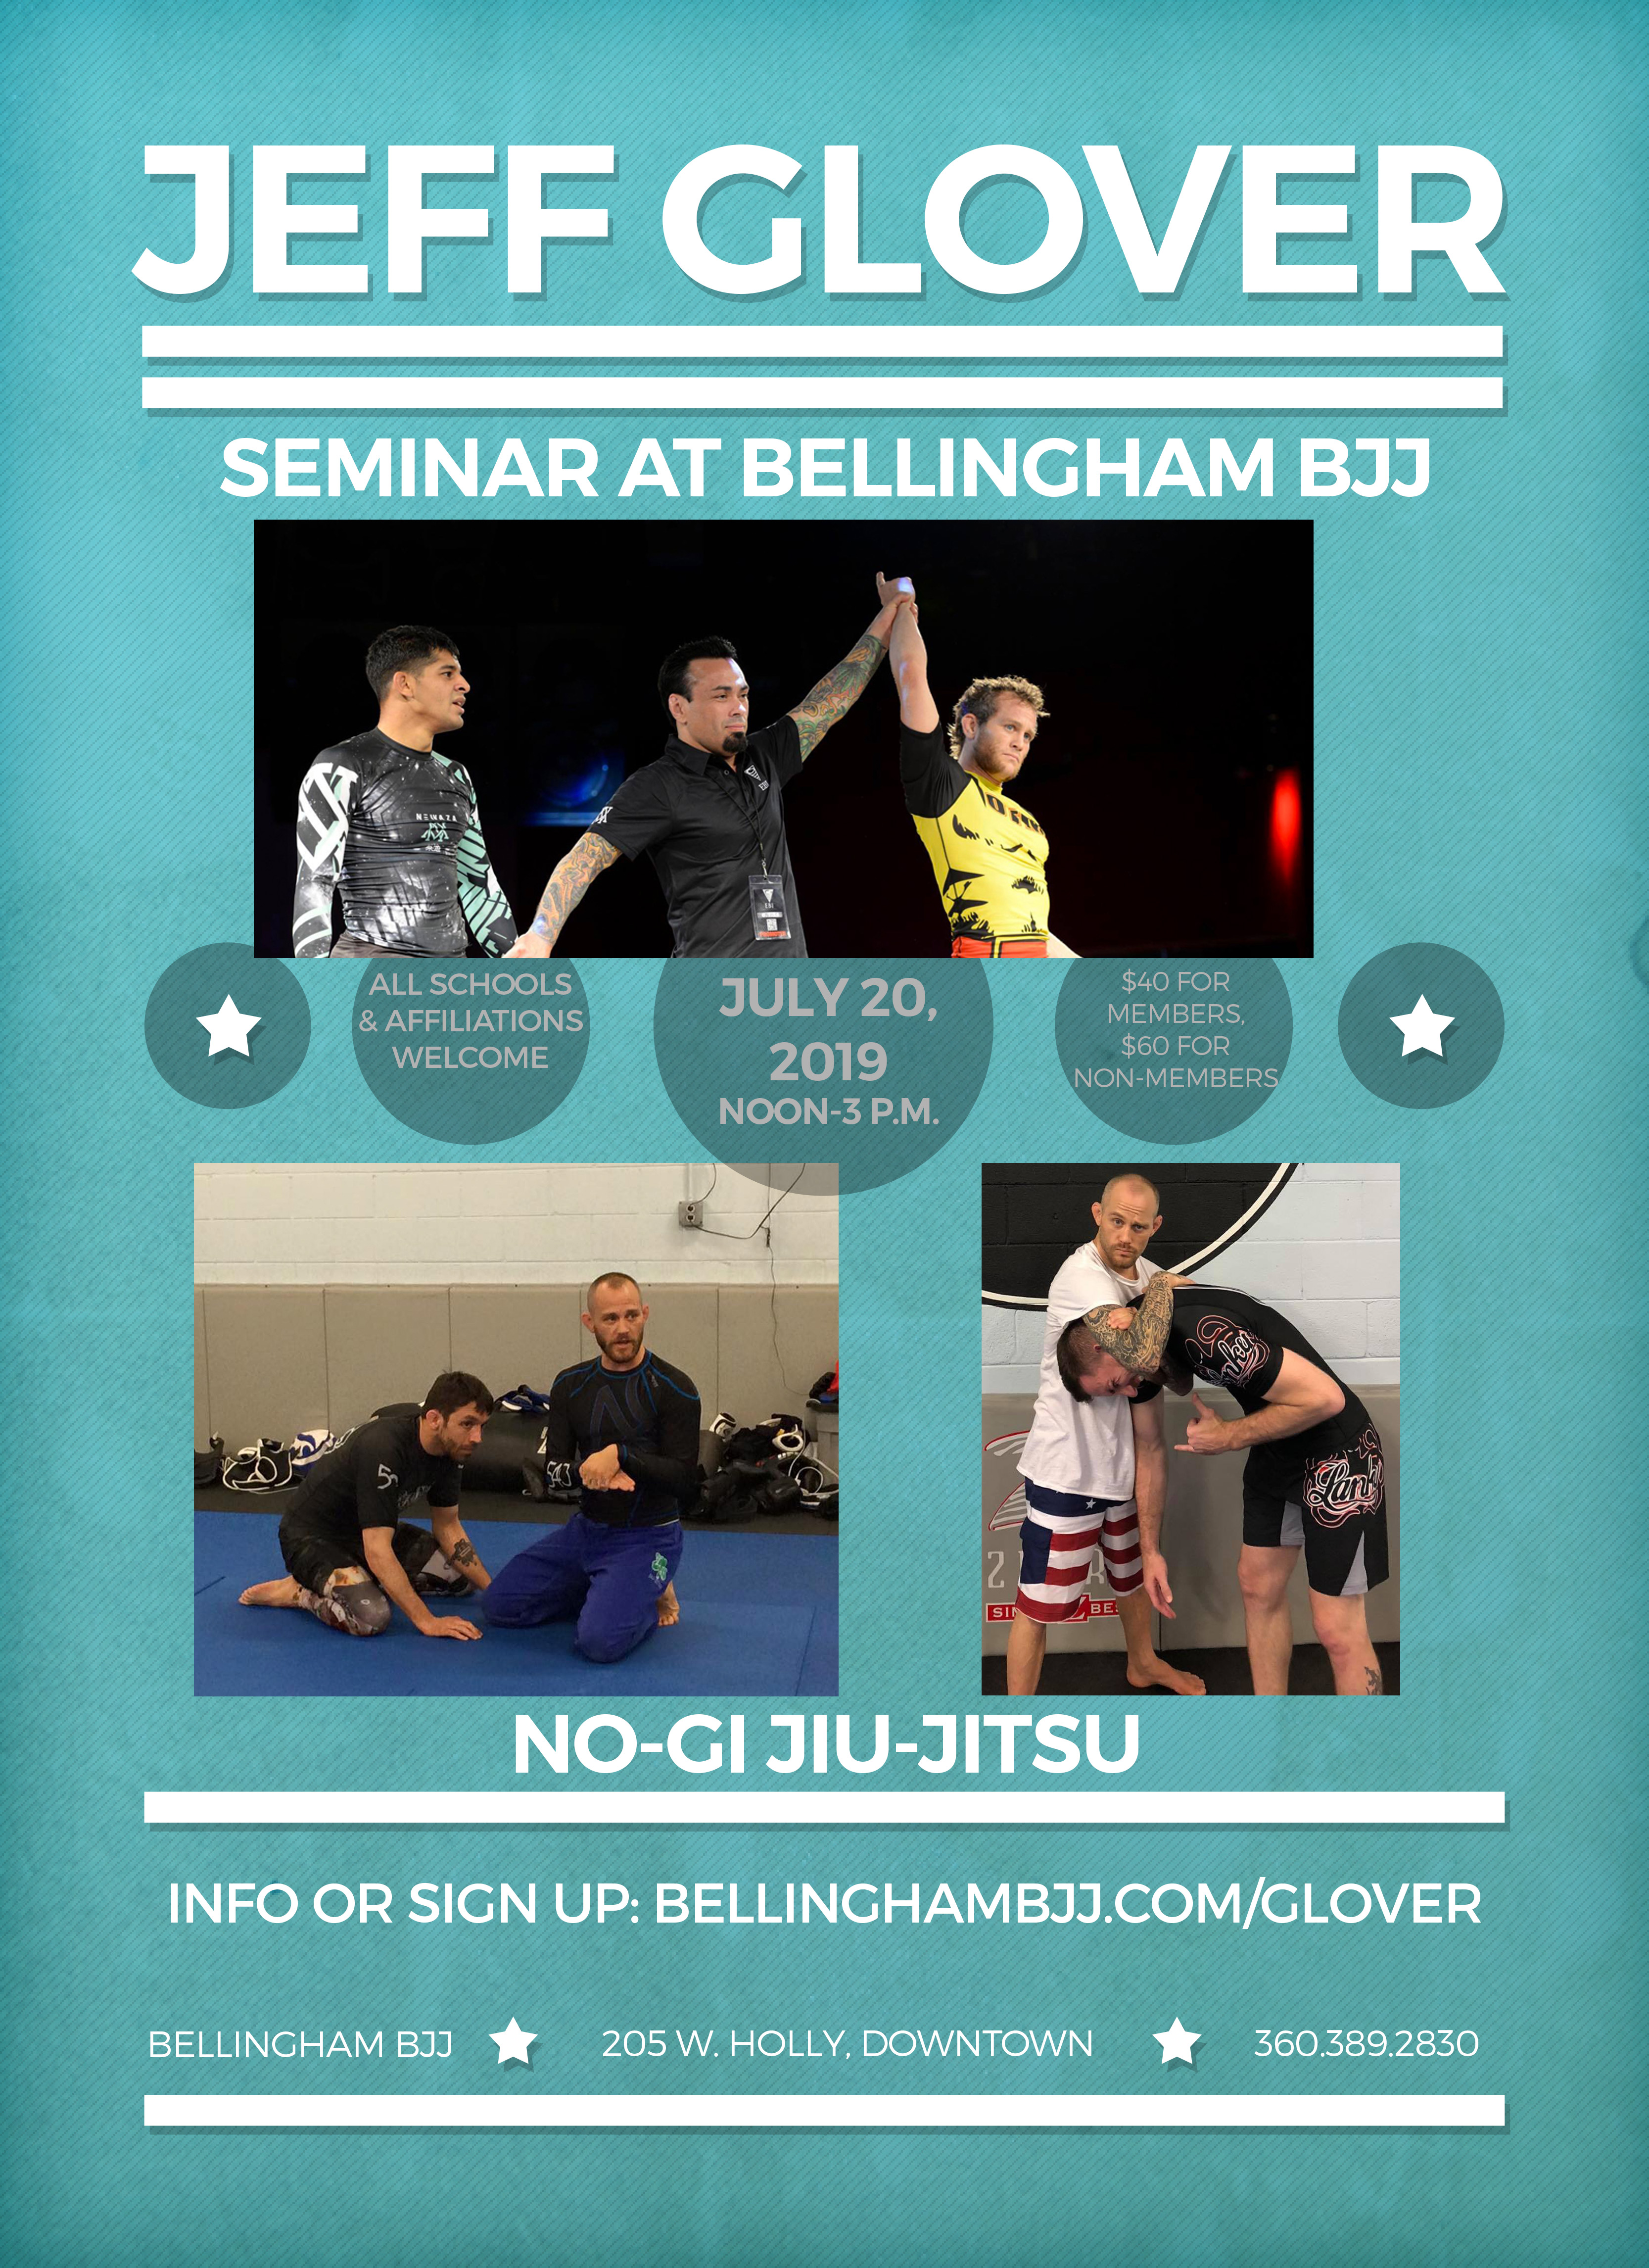 Jeff Glover is coming to Bellingham! No-gi seminar on July 20